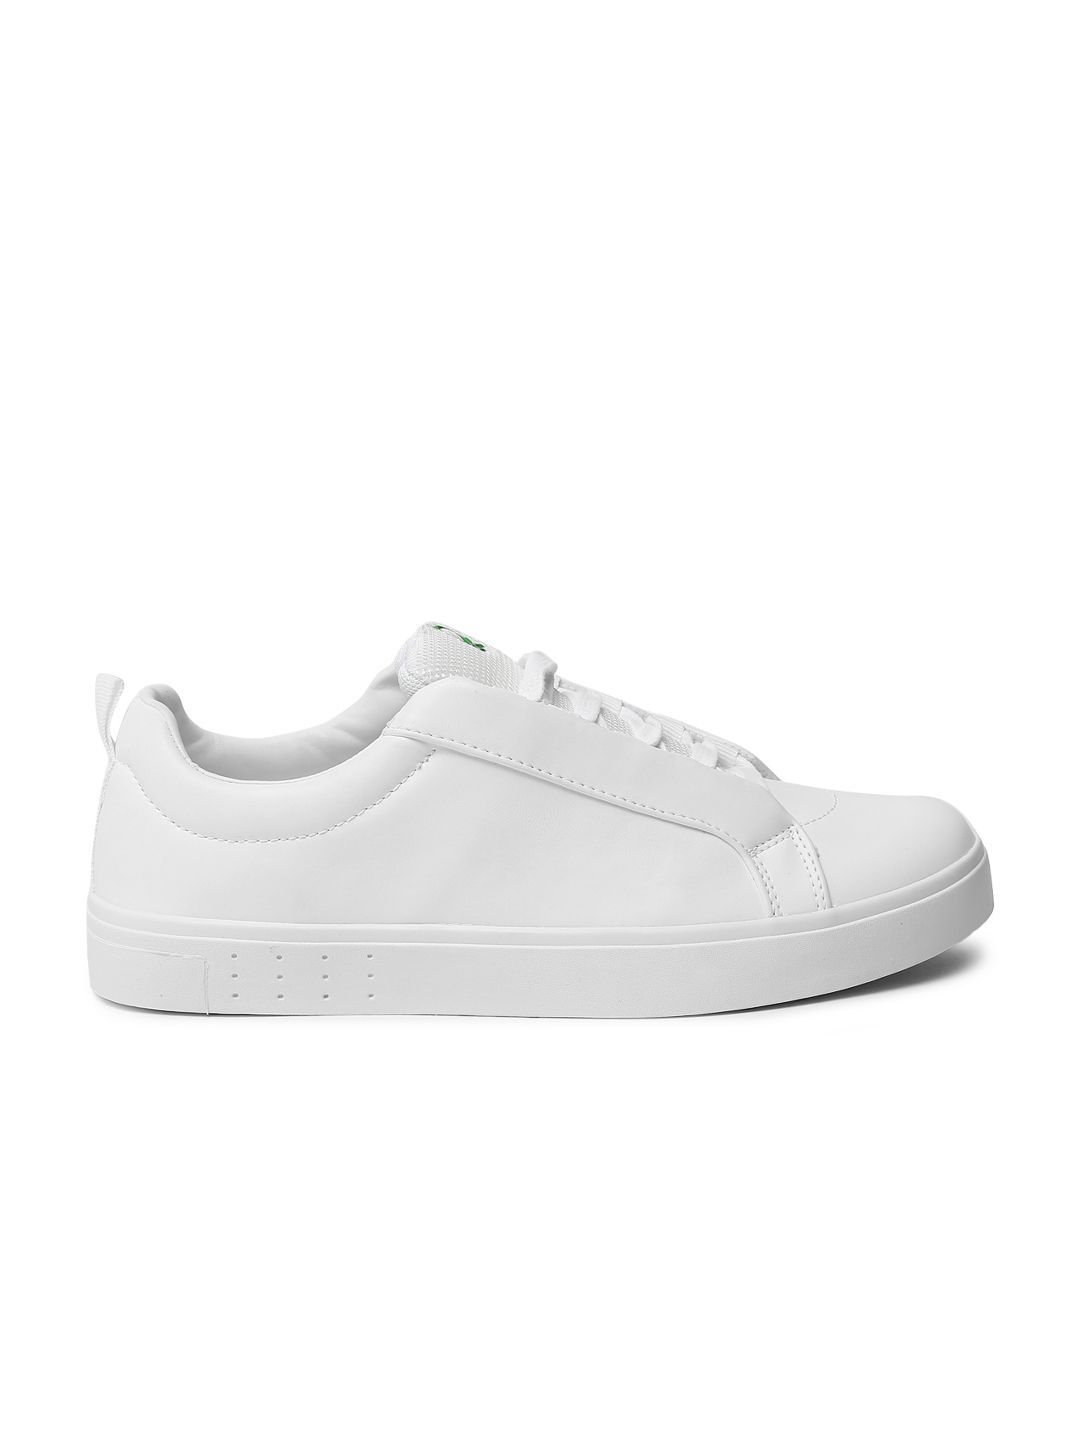 Benetton Sneakers White Casual Shoes 